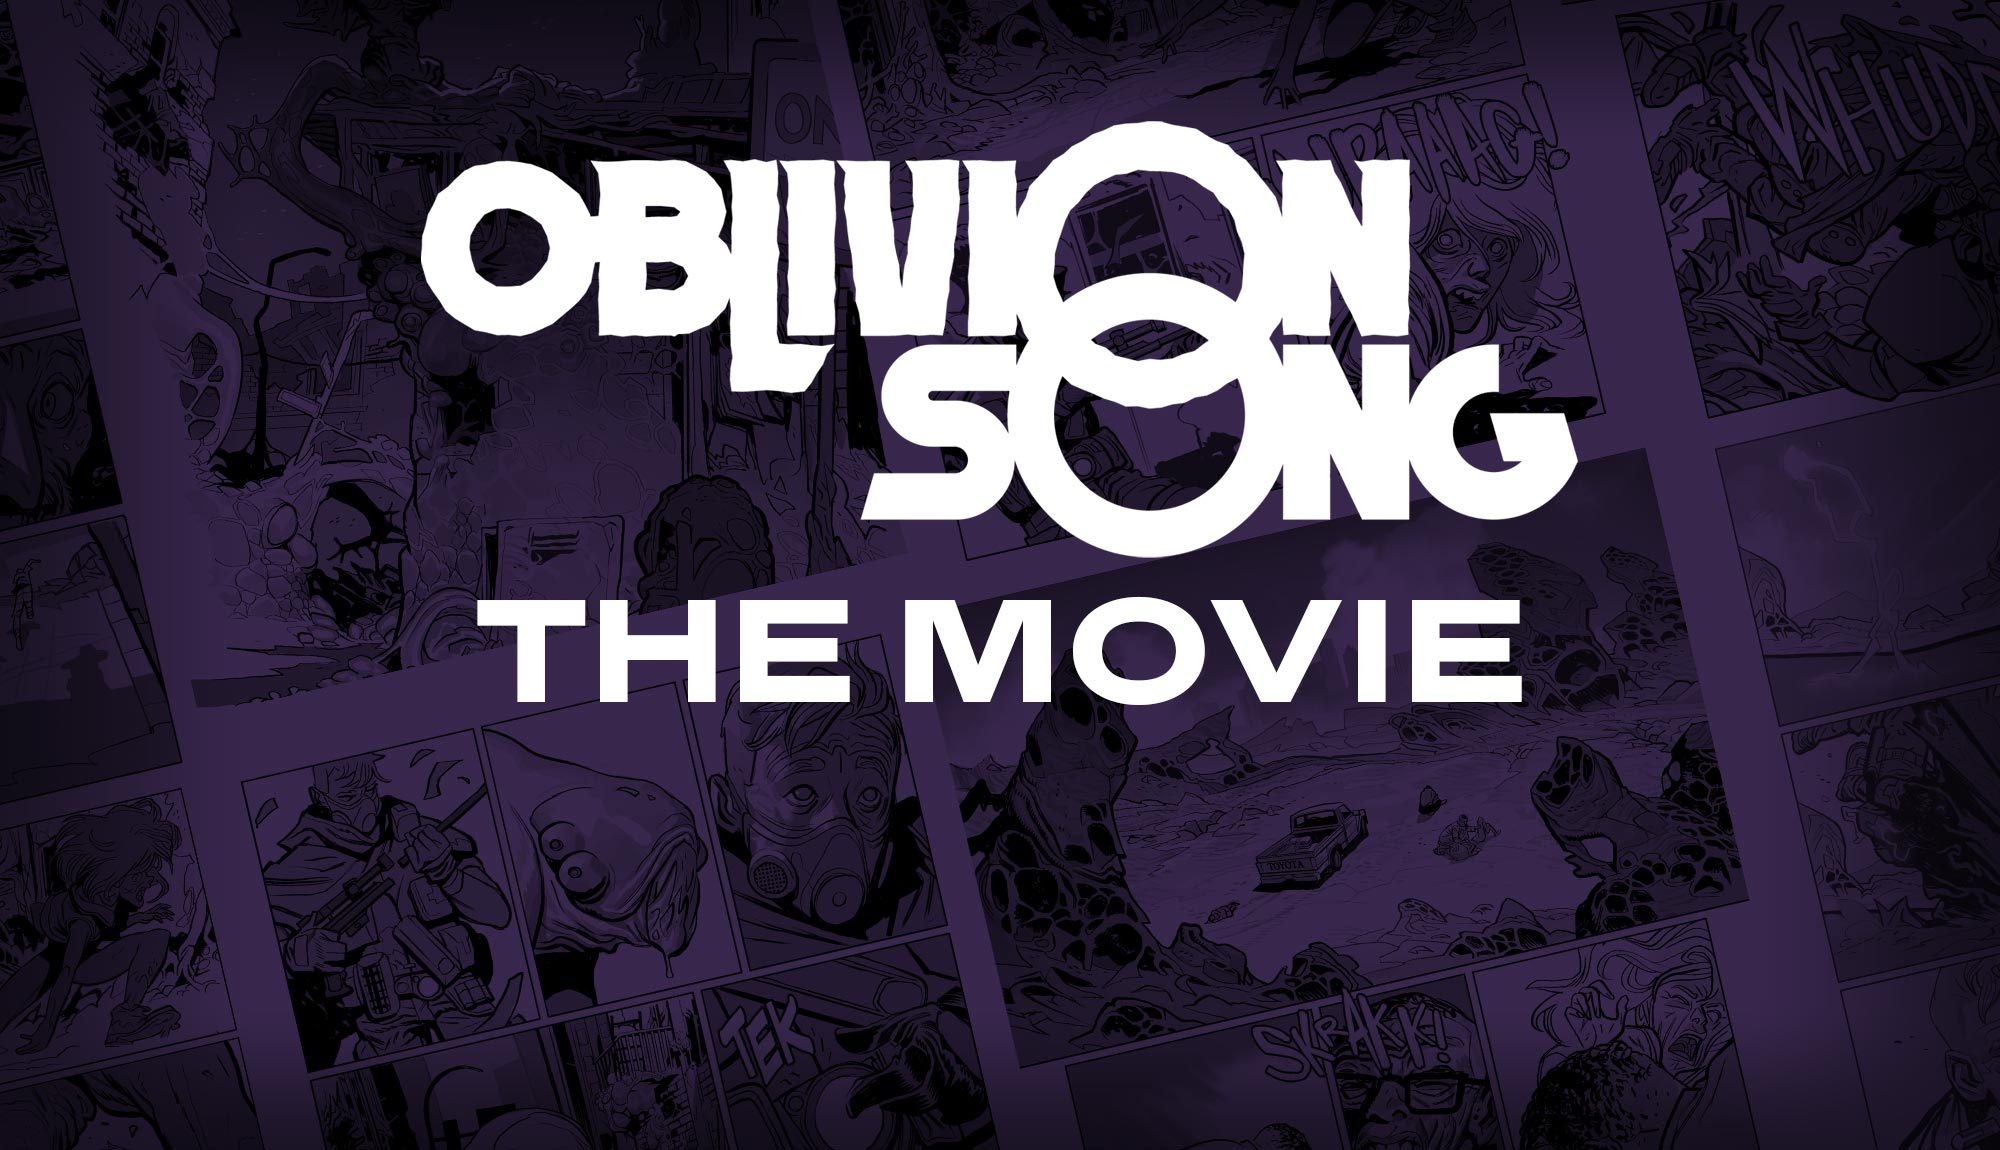 OBLIVION SONG Headed to the Big Screen